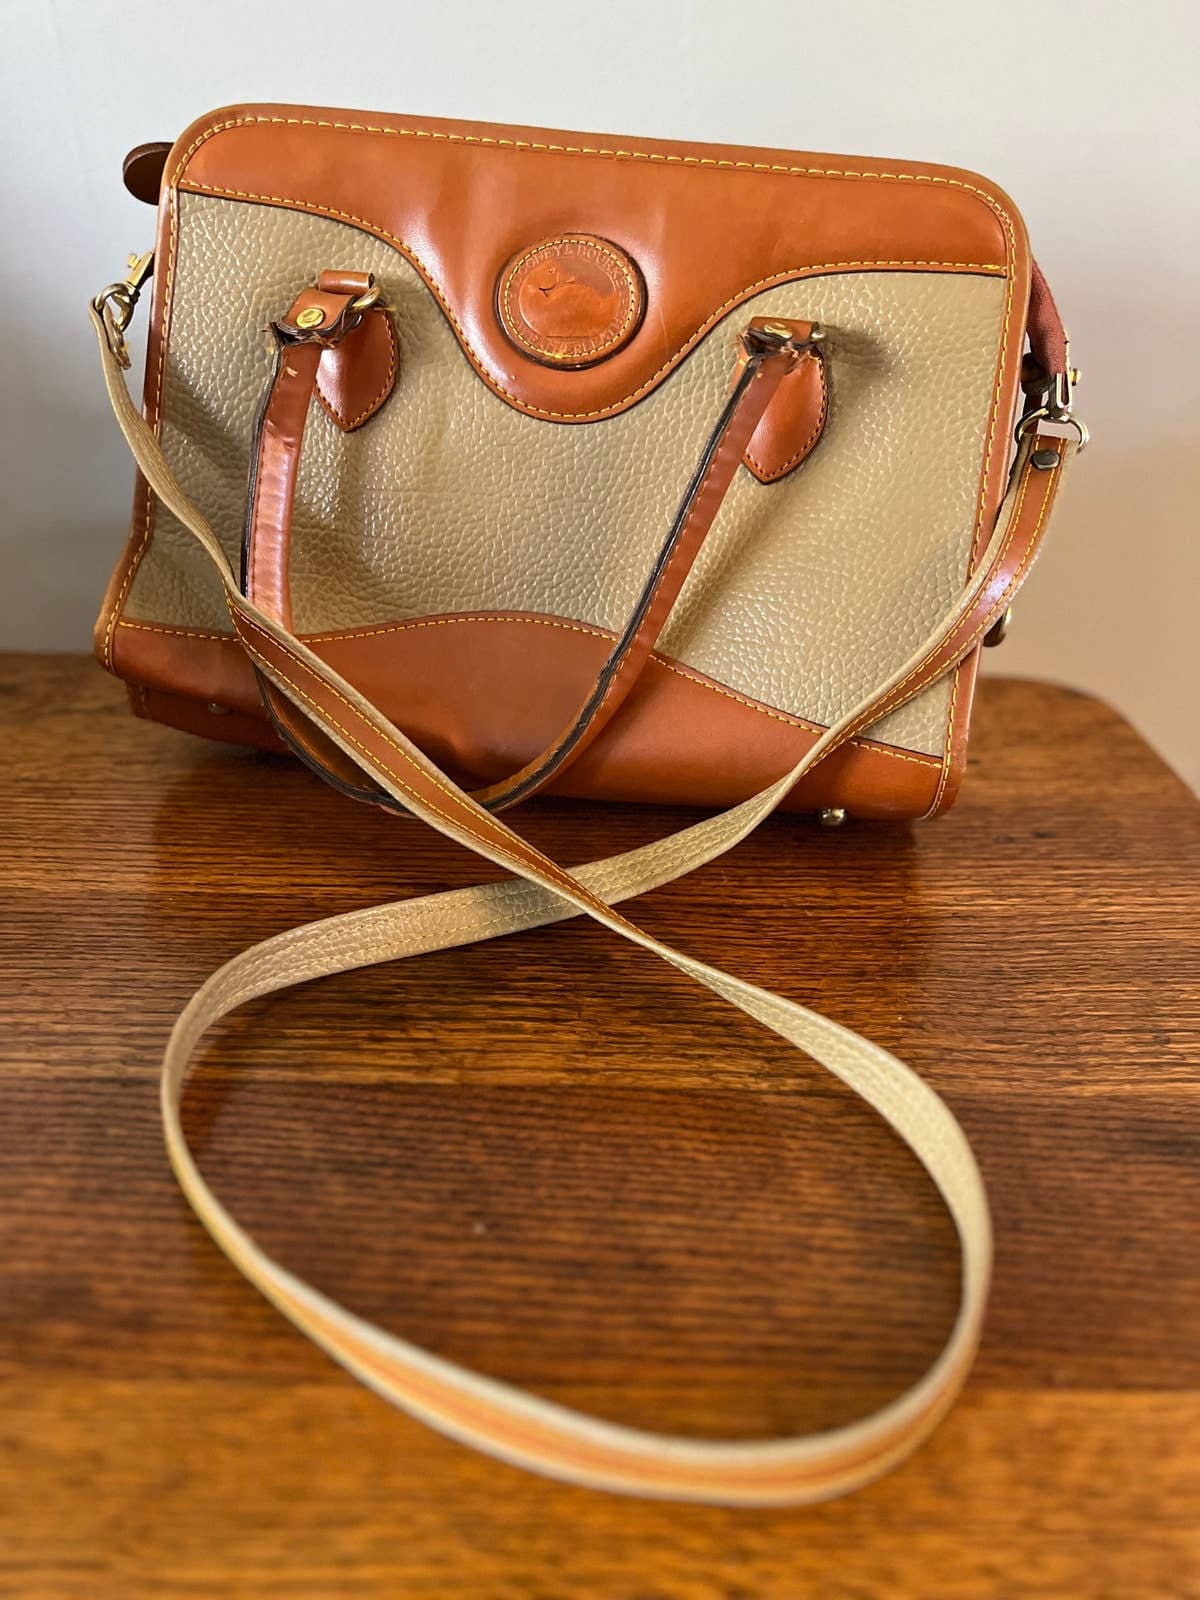 Vintage Dooney and Bourke Multi Carry Shoulder Strap or Handles Light Tan  and Brown Purse/vintage Dooney and Bourke Purse/bag Needs TLC - Etsy